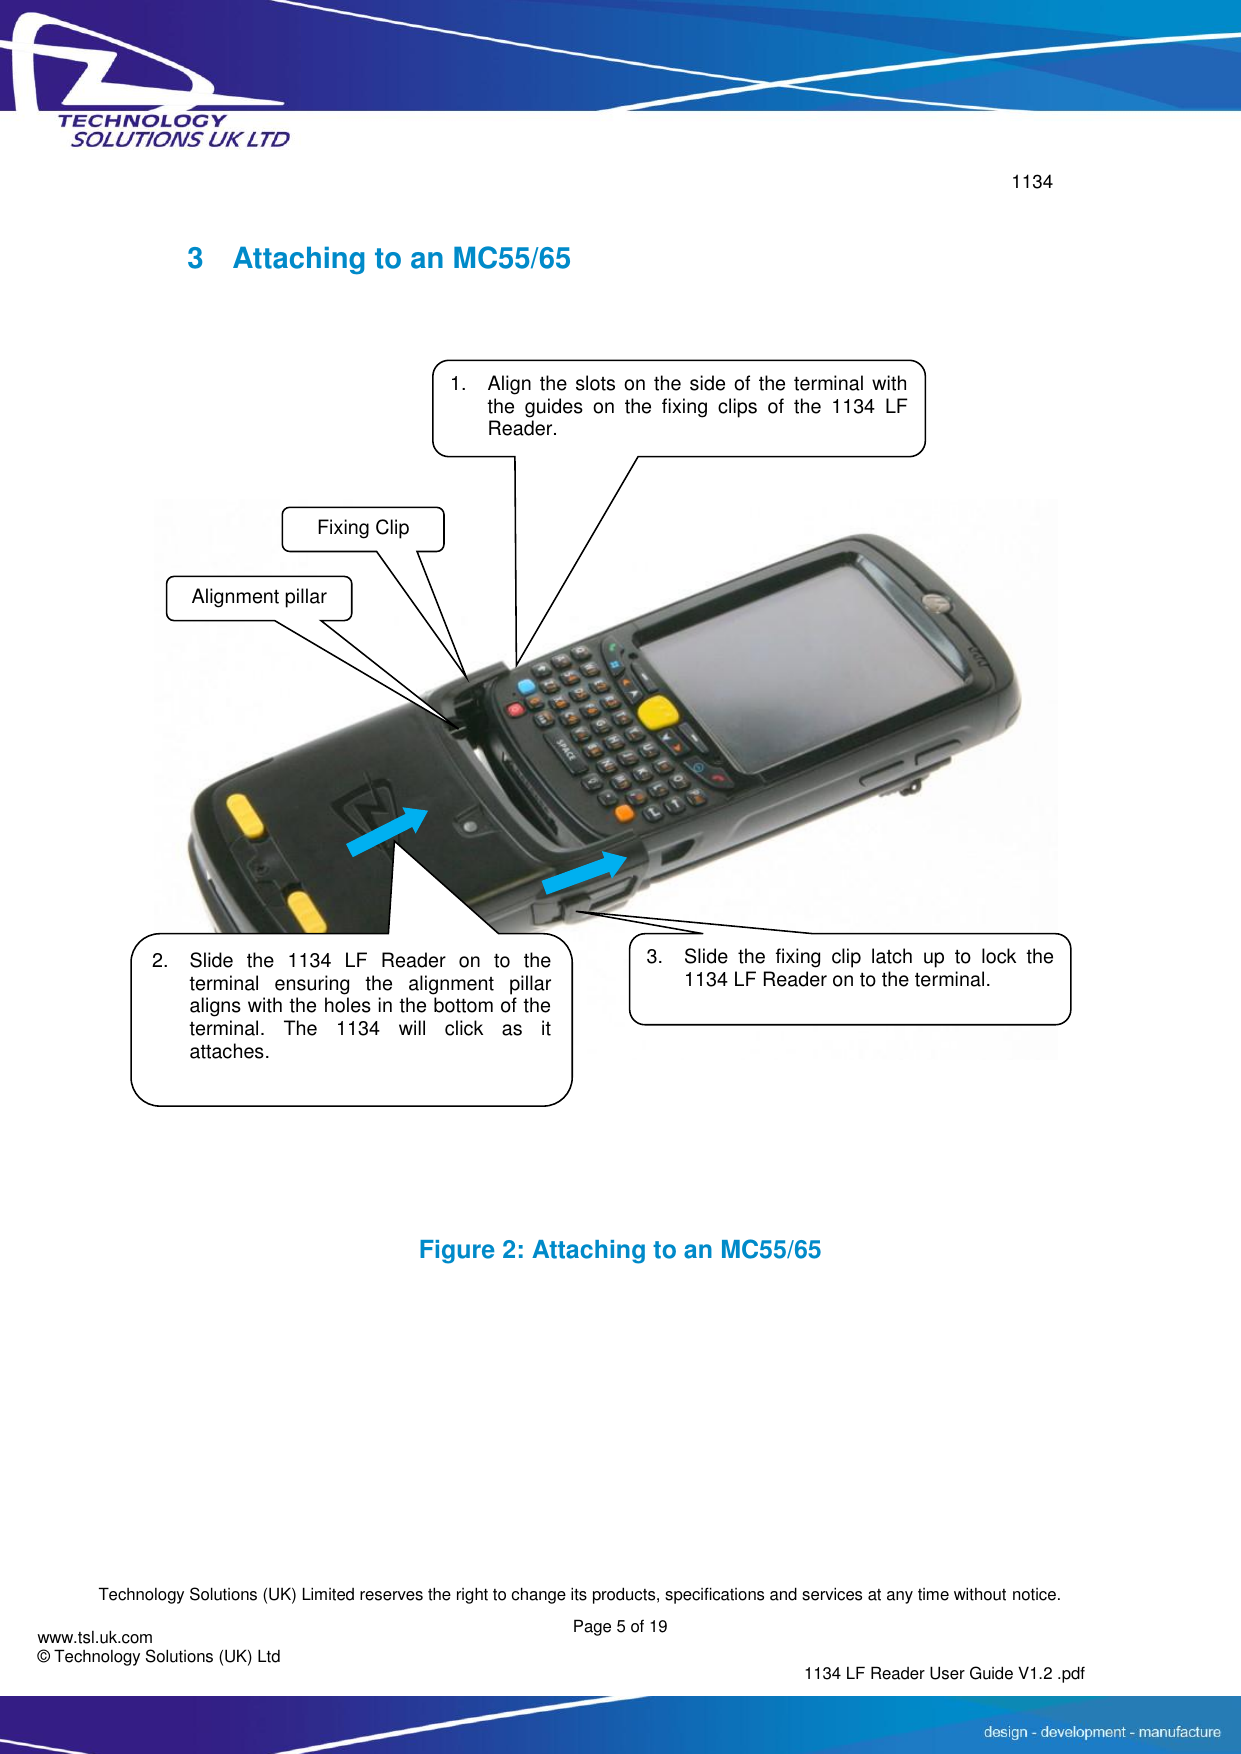        1134  Technology Solutions (UK) Limited reserves the right to change its products, specifications and services at any time without notice.   Page 5 of 19 1134 LF Reader User Guide V1.2 .pdf www.tsl.uk.com © Technology Solutions (UK) Ltd  3  Attaching to an MC55/65    Figure 2: Attaching to an MC55/65 Fixing Clip 1. Align the slots on the side of the terminal with the  guides  on  the  fixing  clips  of  the  1134  LF Reader. 2. Slide  the  1134  LF  Reader  on  to  the terminal  ensuring  the  alignment  pillar aligns with the holes in the bottom of the terminal.  The  1134  will  click  as  it attaches.  Alignment pillar 3. Slide  the  fixing  clip  latch  up  to  lock  the 1134 LF Reader on to the terminal.  